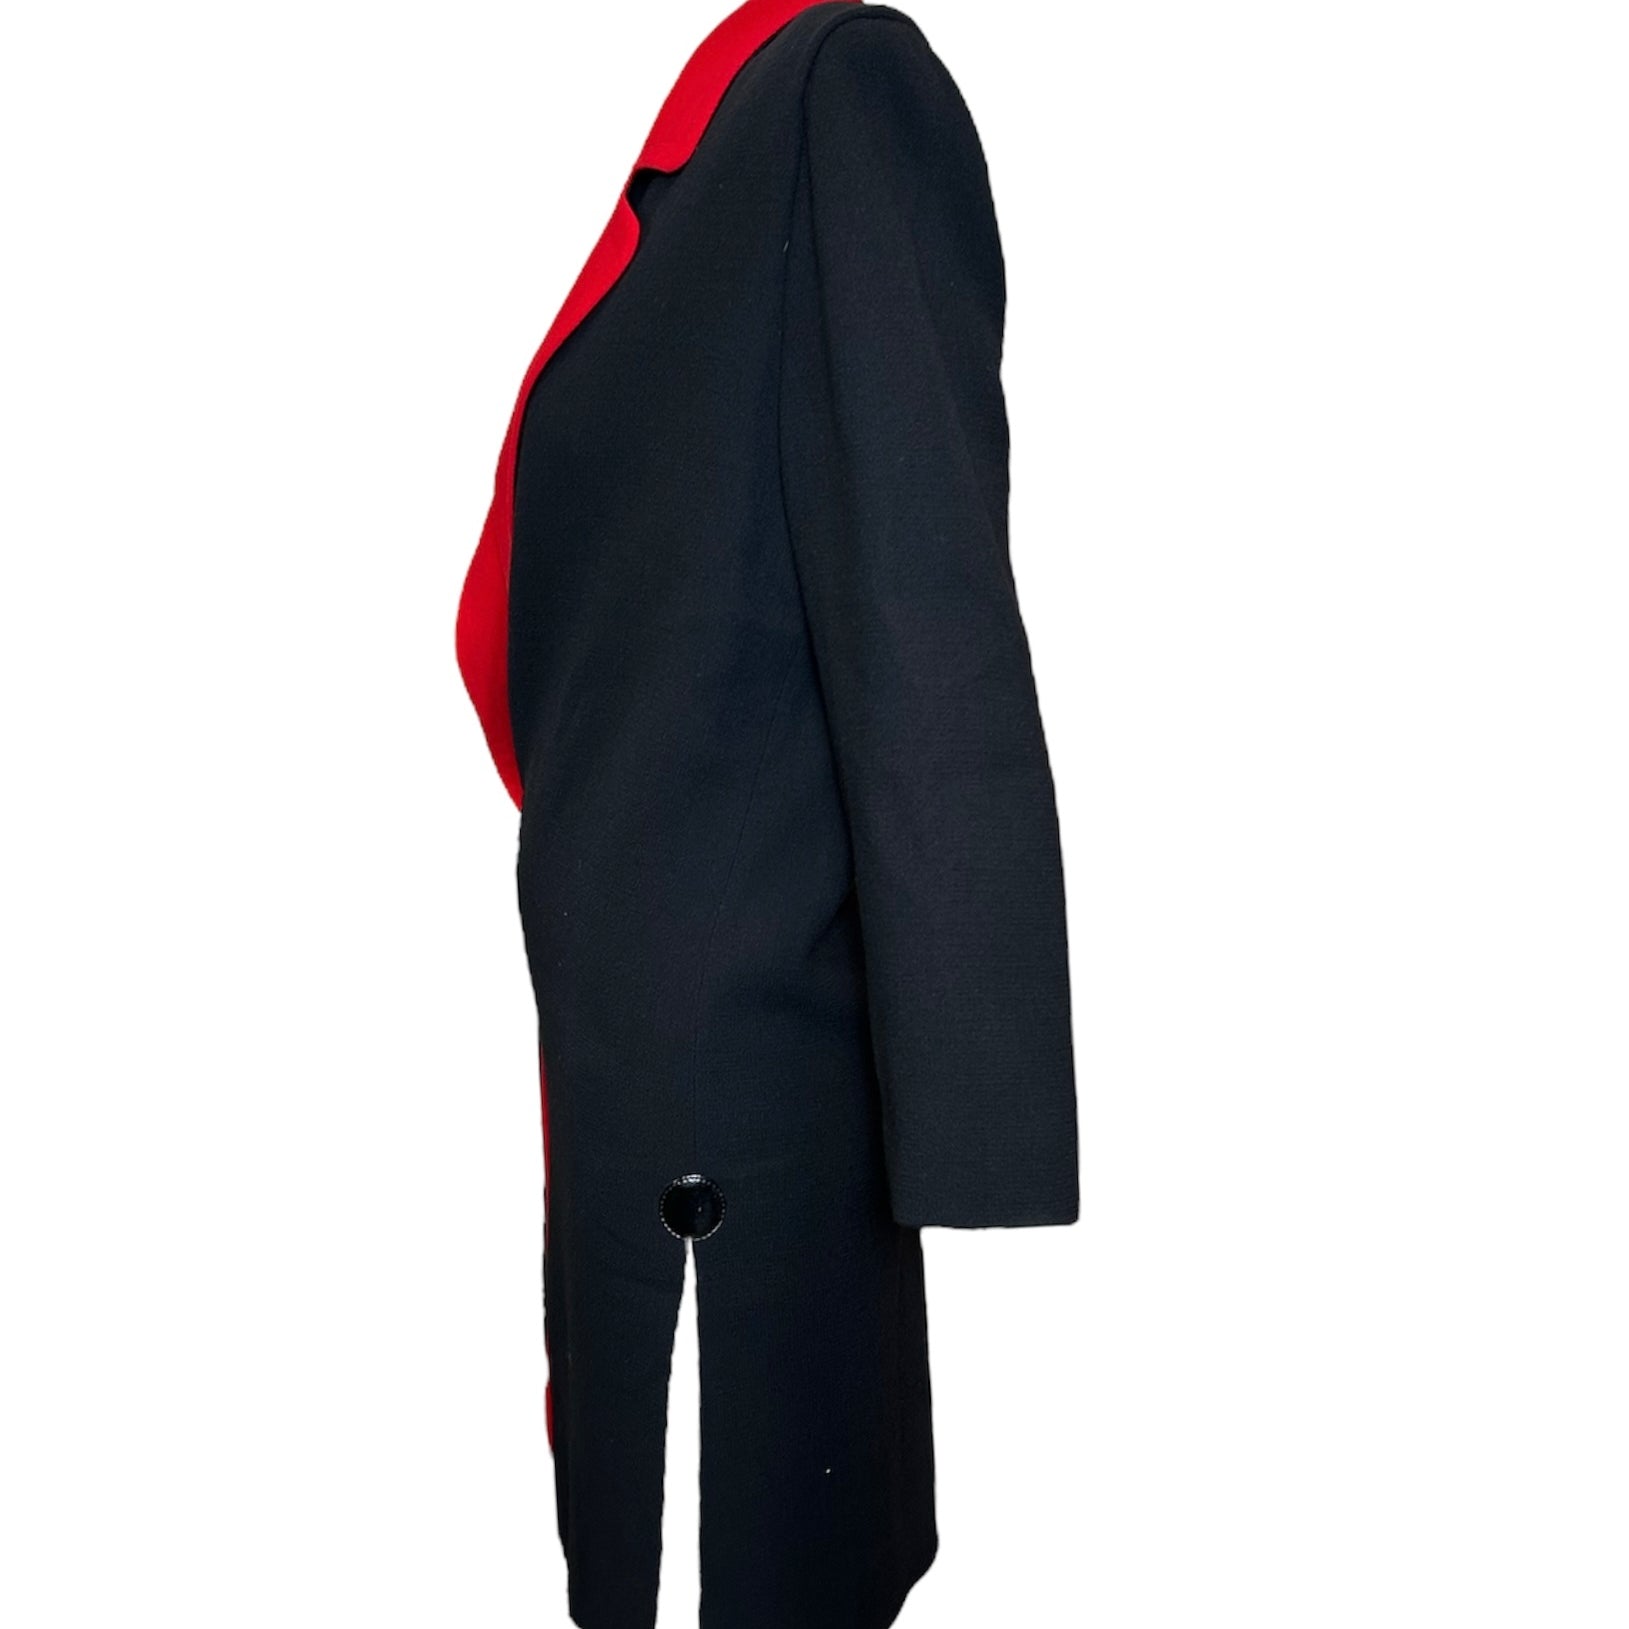 Pierre Cardin Red & Black Mod Overcoat with Leather Accents SIDE PHOTO 2 OF 5